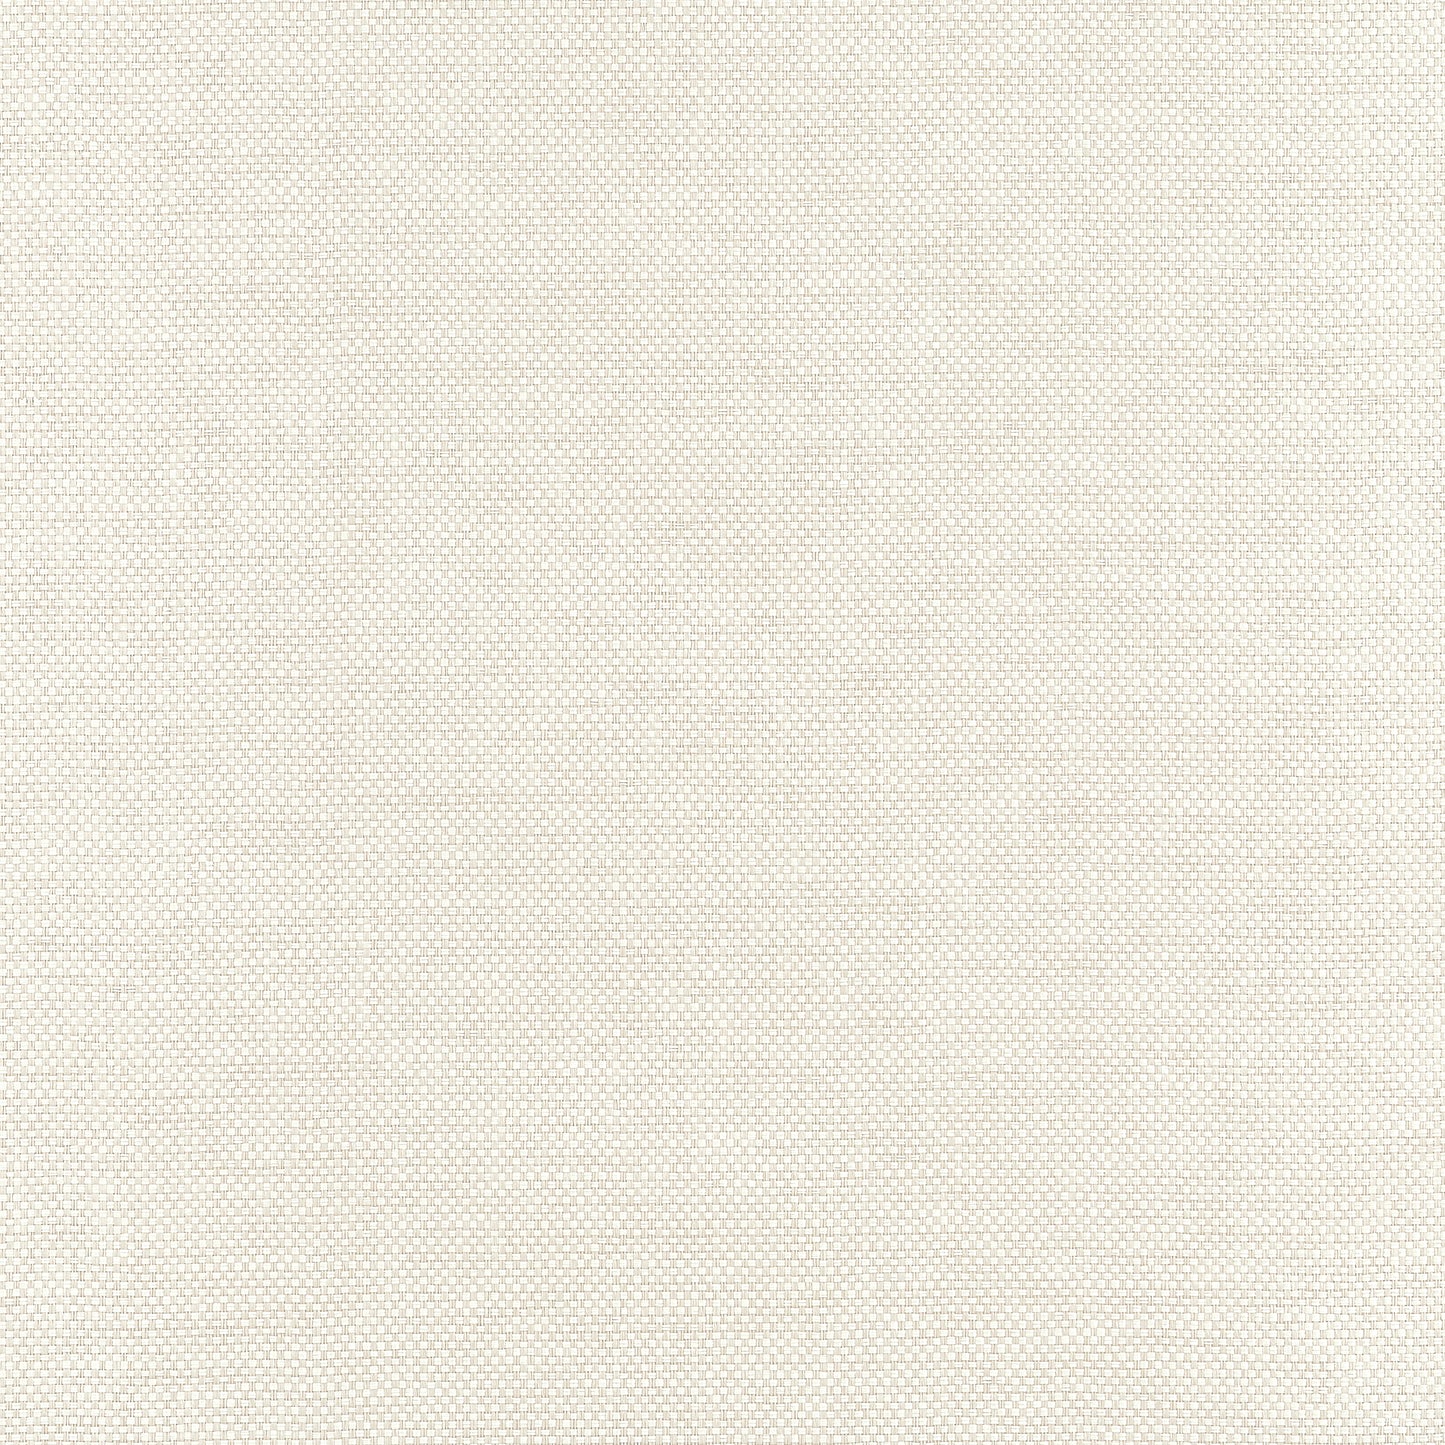 Purchase Thibaut Wallpaper Item# T19680 pattern name Clarkson Weave color Cream. 